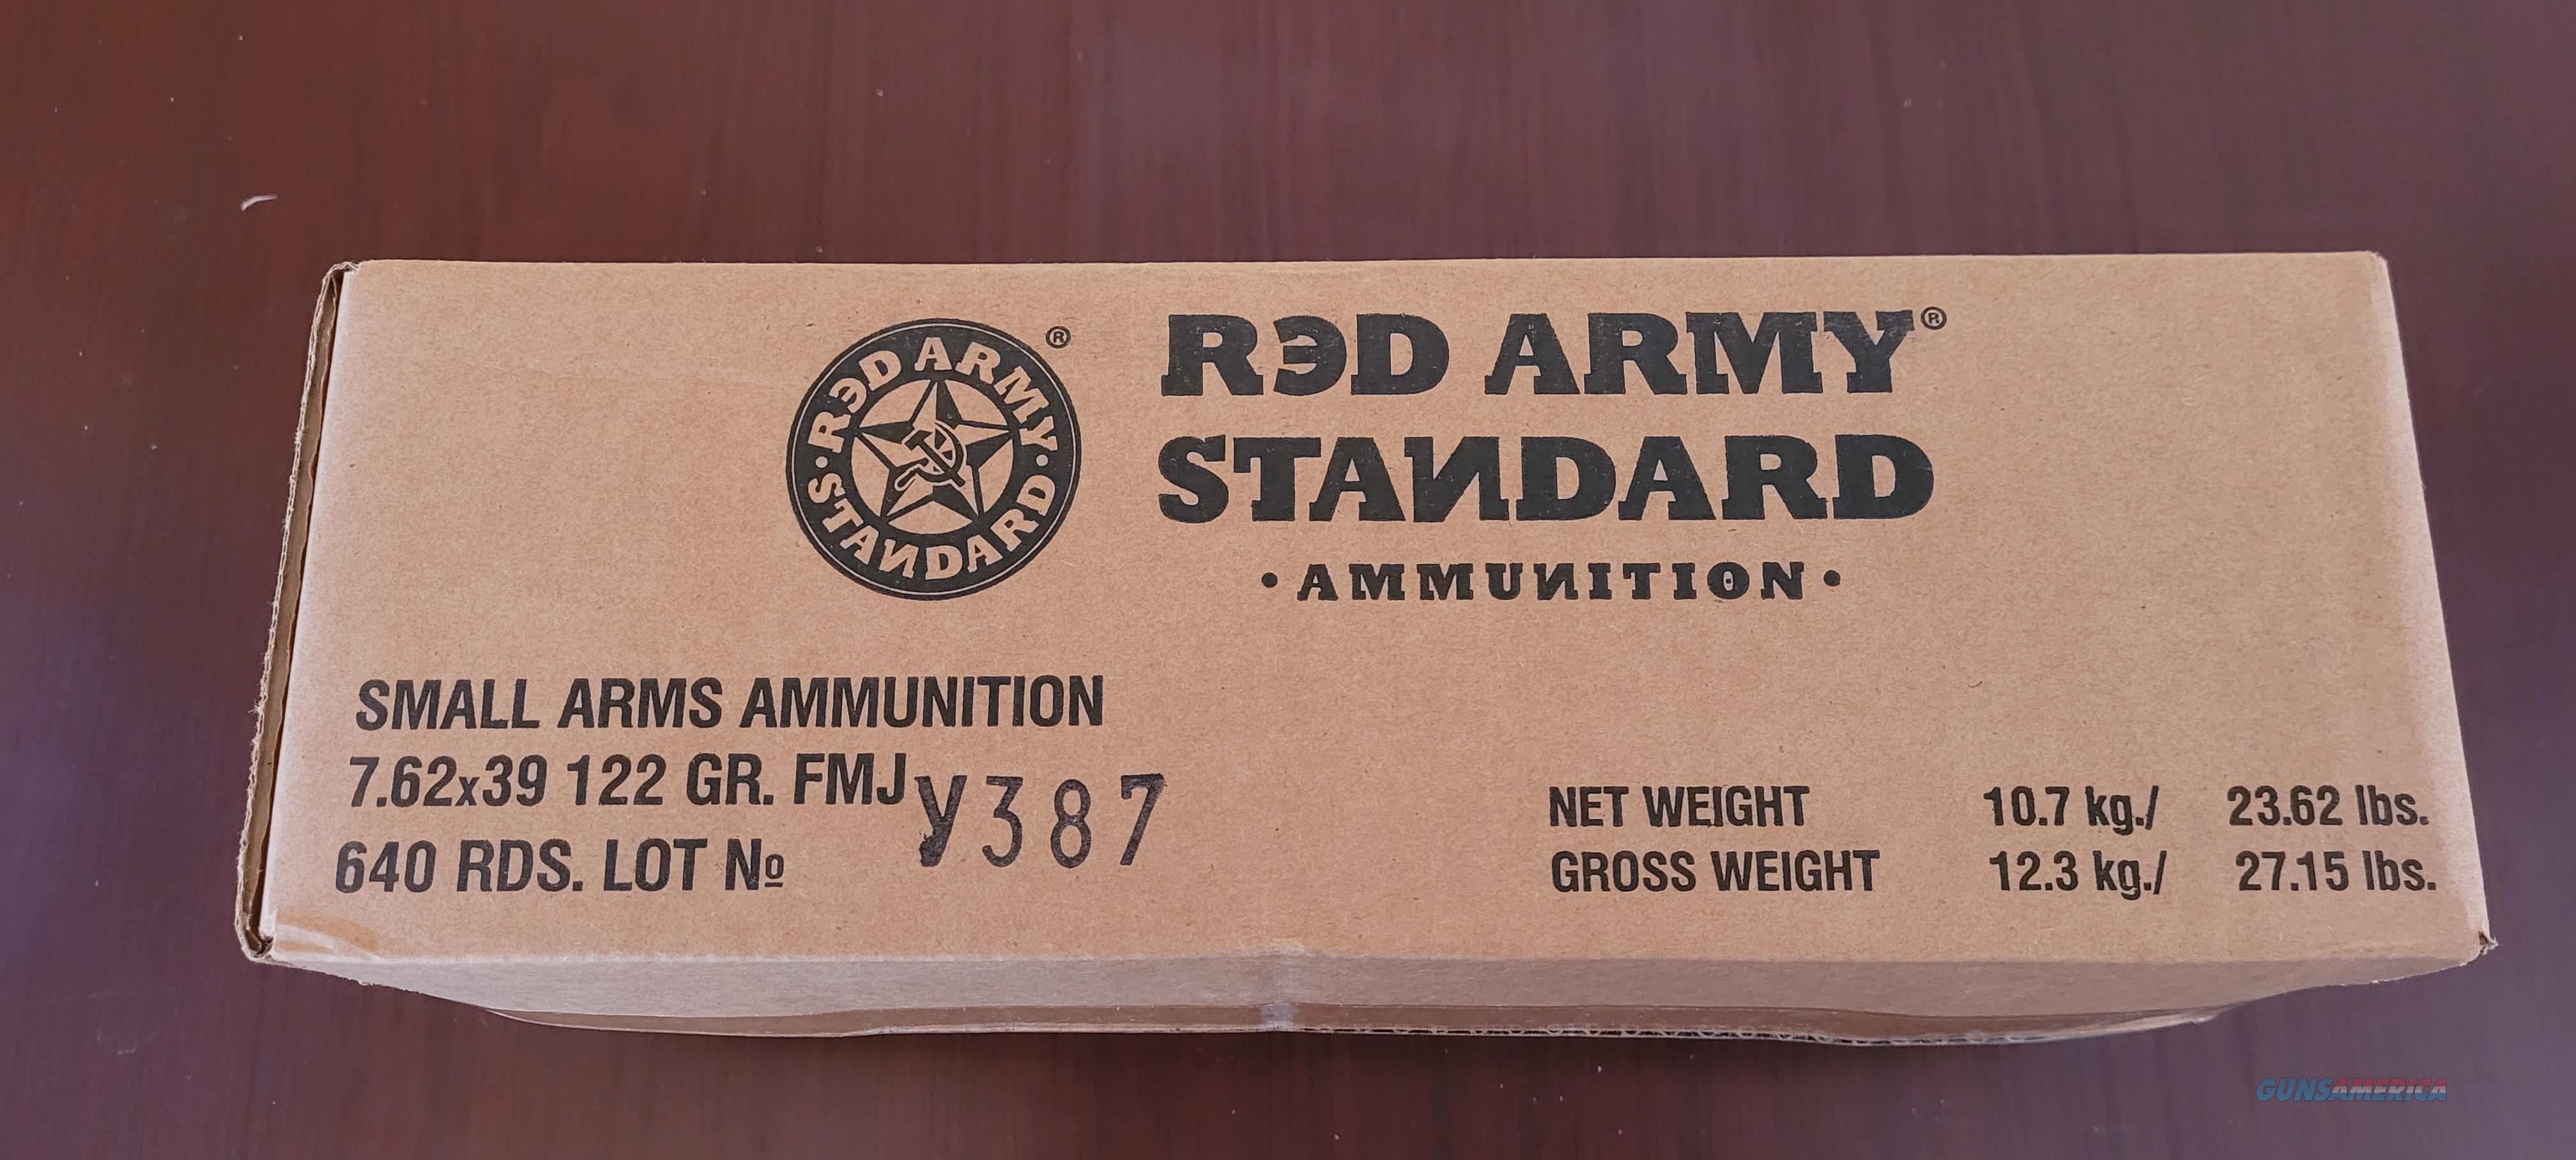 SPAM CAN 7.62x39 (640) rounds Red A... for sale at Gunsamerica.com ...